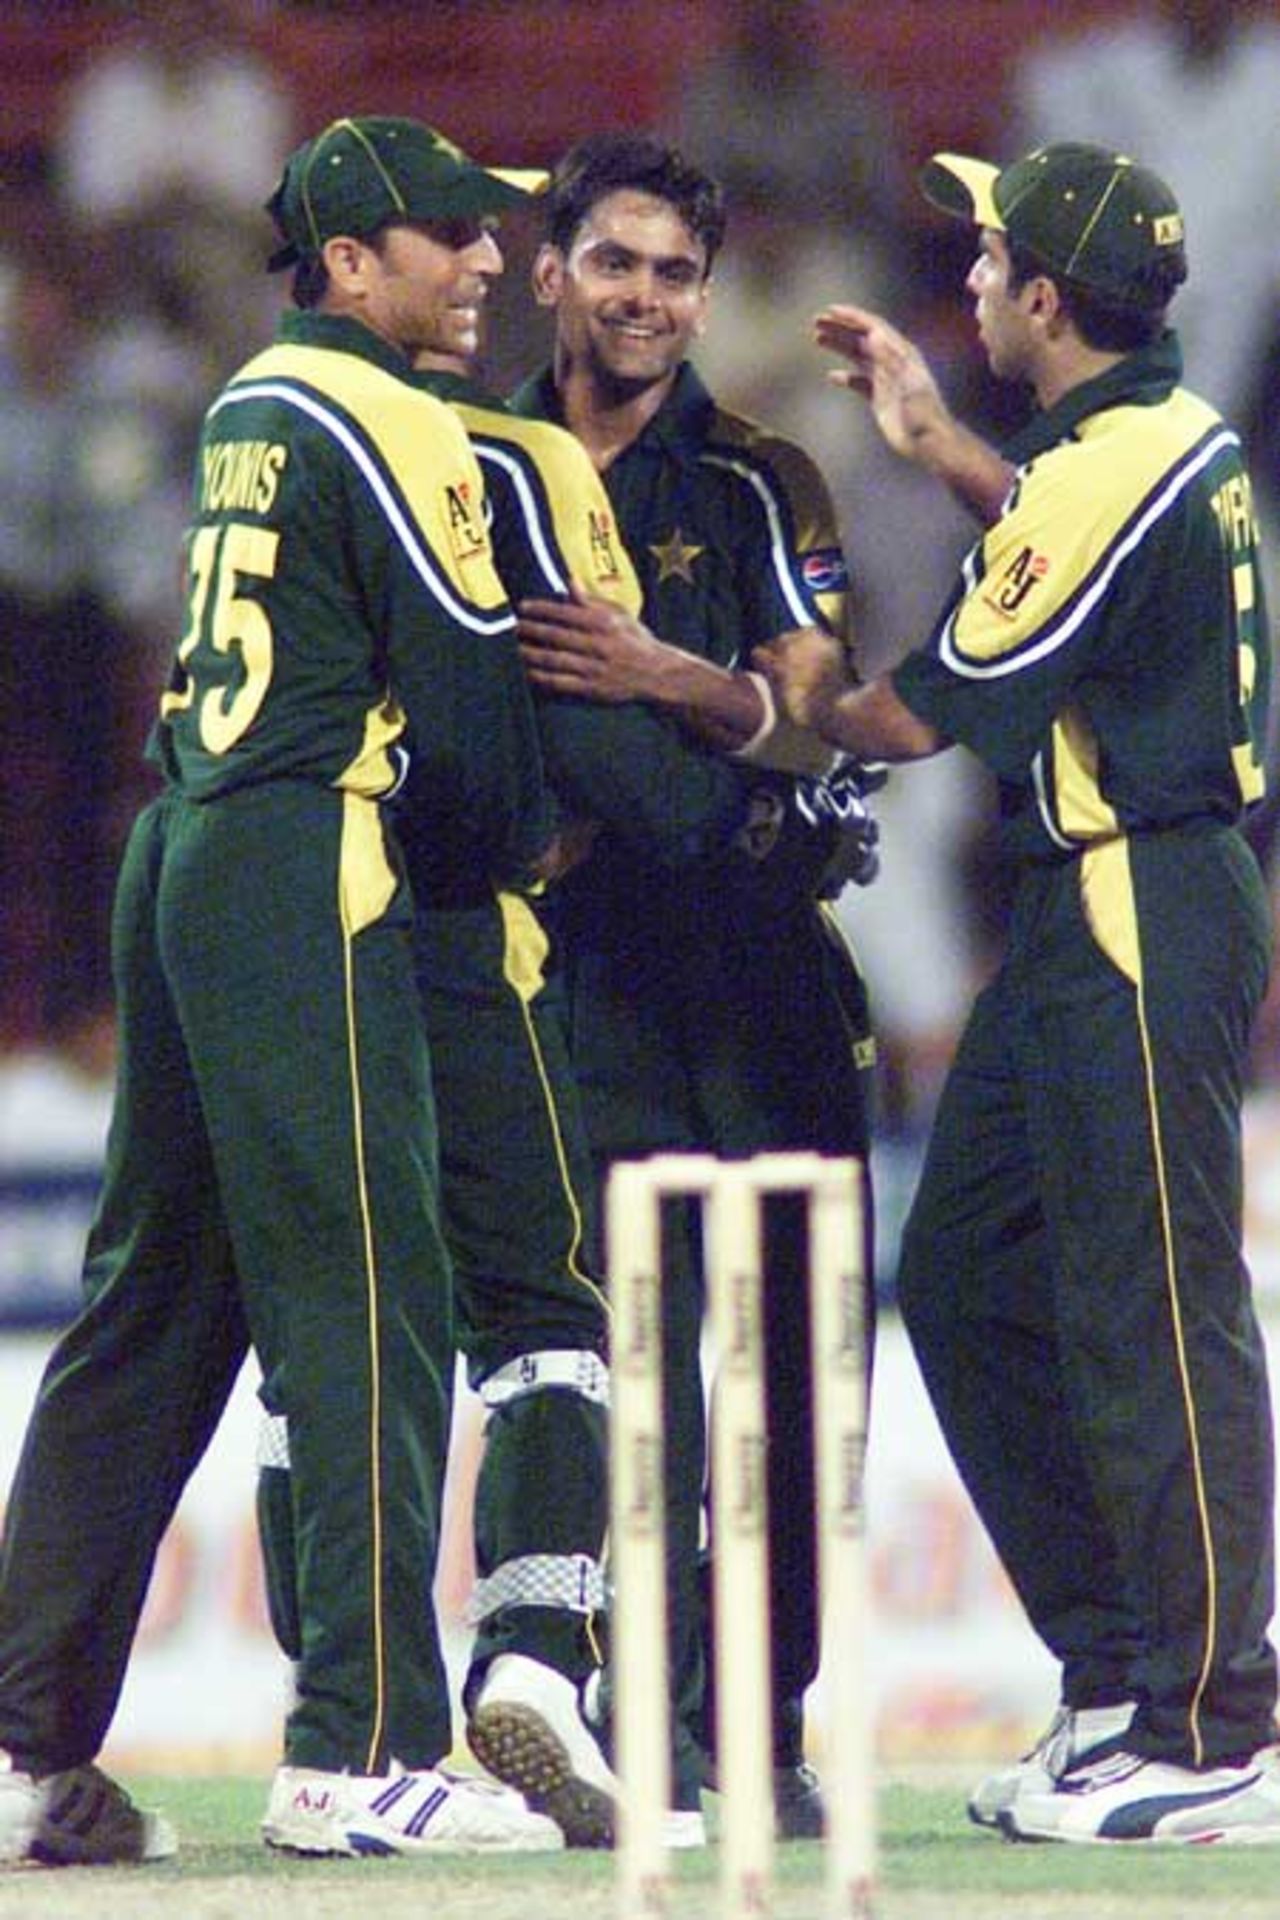 Mohammad Hafeez congratulated by Younis Khan and Taufeeq Umar after taking a wicket, 1st Match: Pakistan v Zimbabwe, Cherry Blossom Sharjah Cup, 3 April 2003